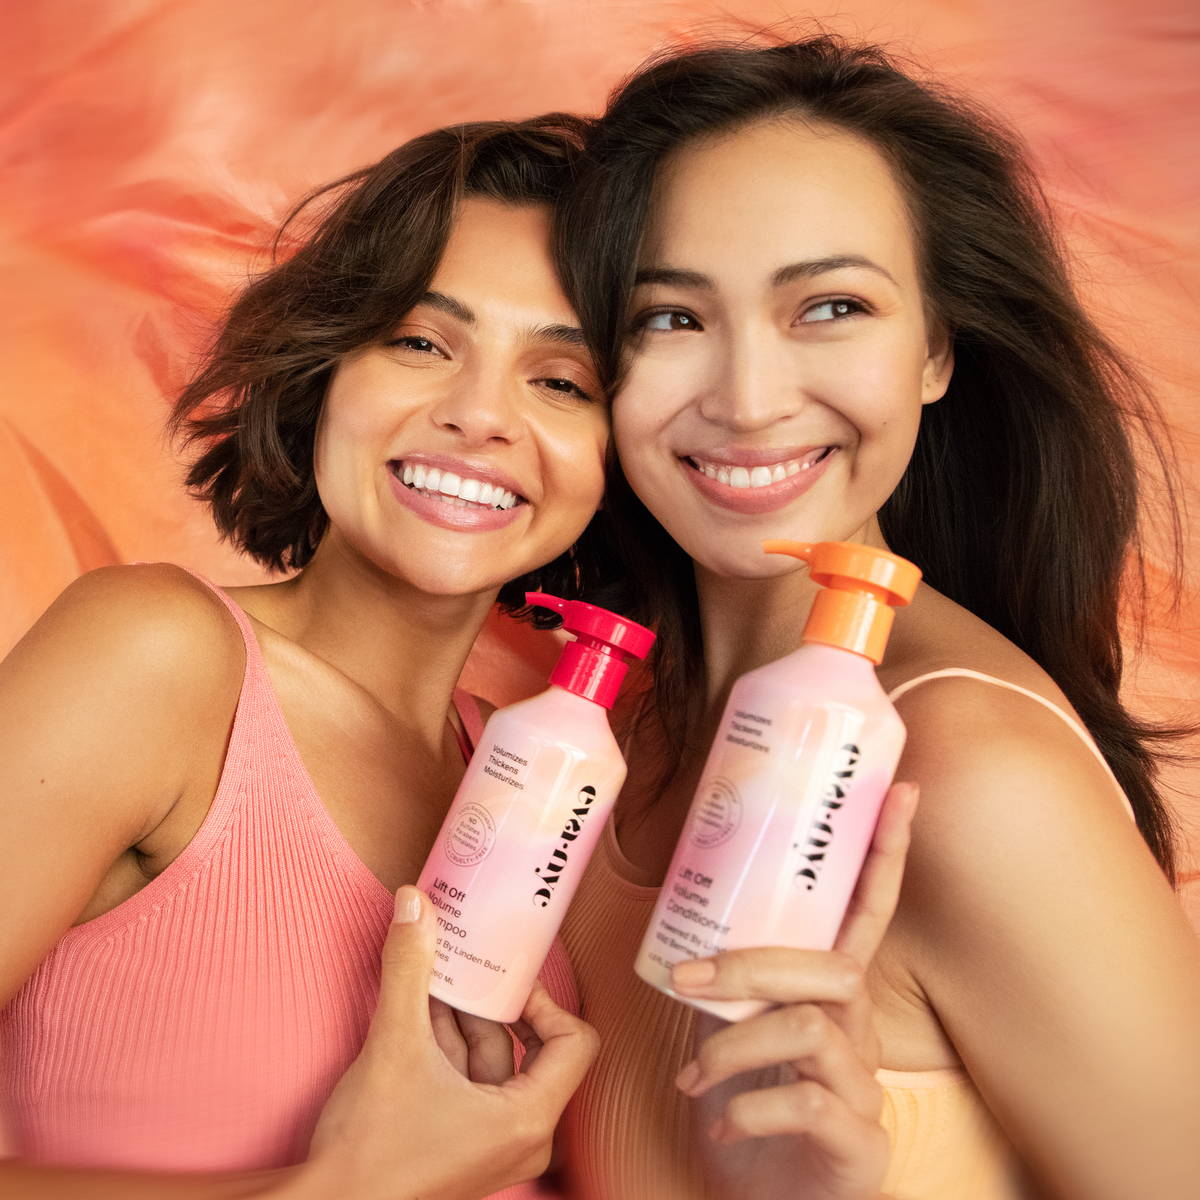 Models holding Lift Off Volume Shampoo and Conditioner